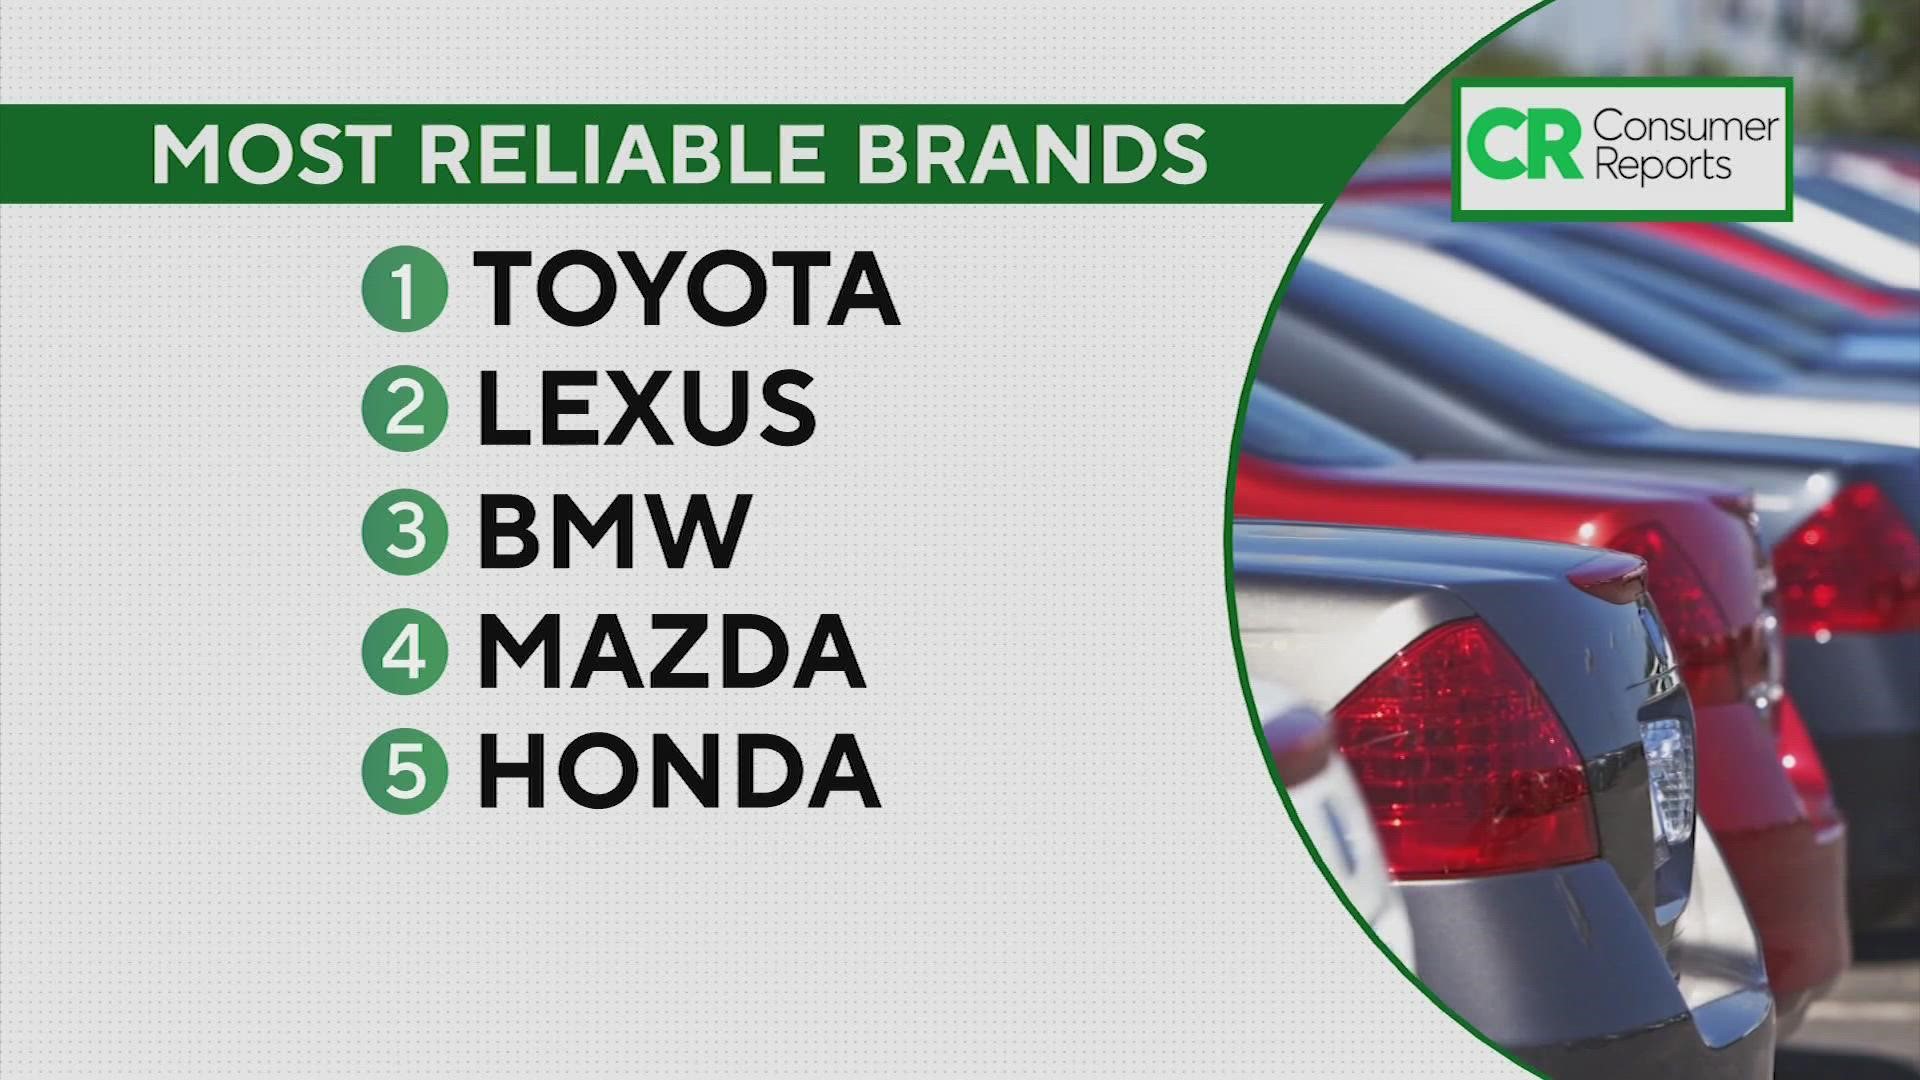 Consumer Reports is out with the 2022 list of the most reliable cars. Hybrid vehicles are taking the lead.